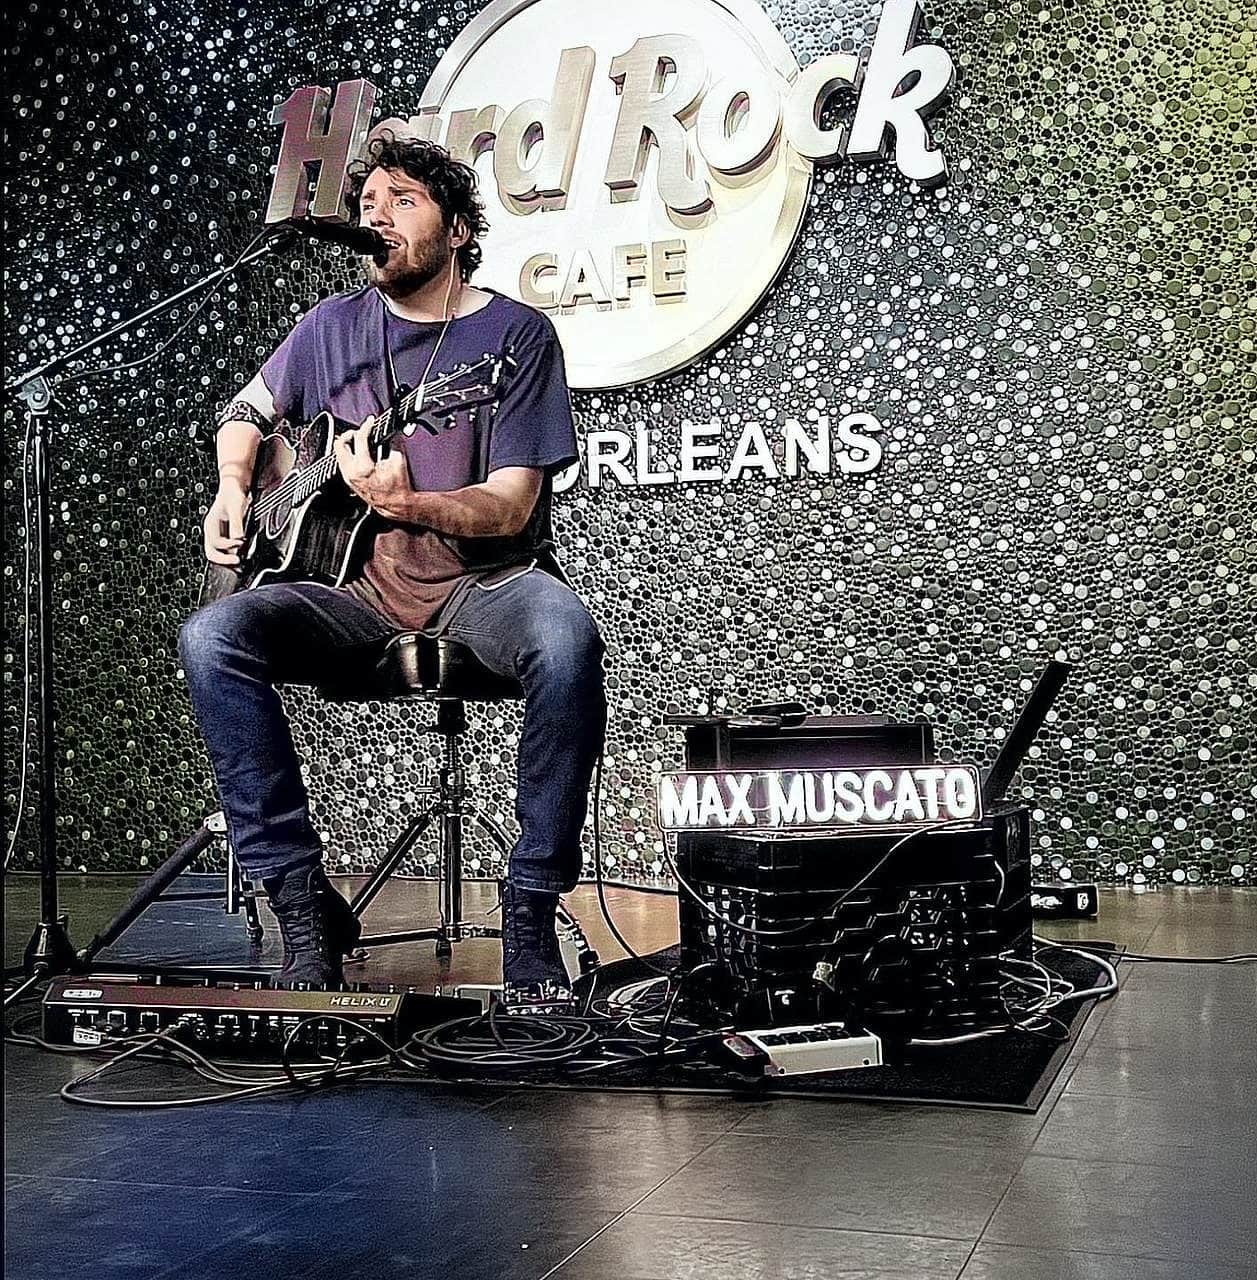 Max Muscato Performing At The Hard Rock Cafe In New Orleans